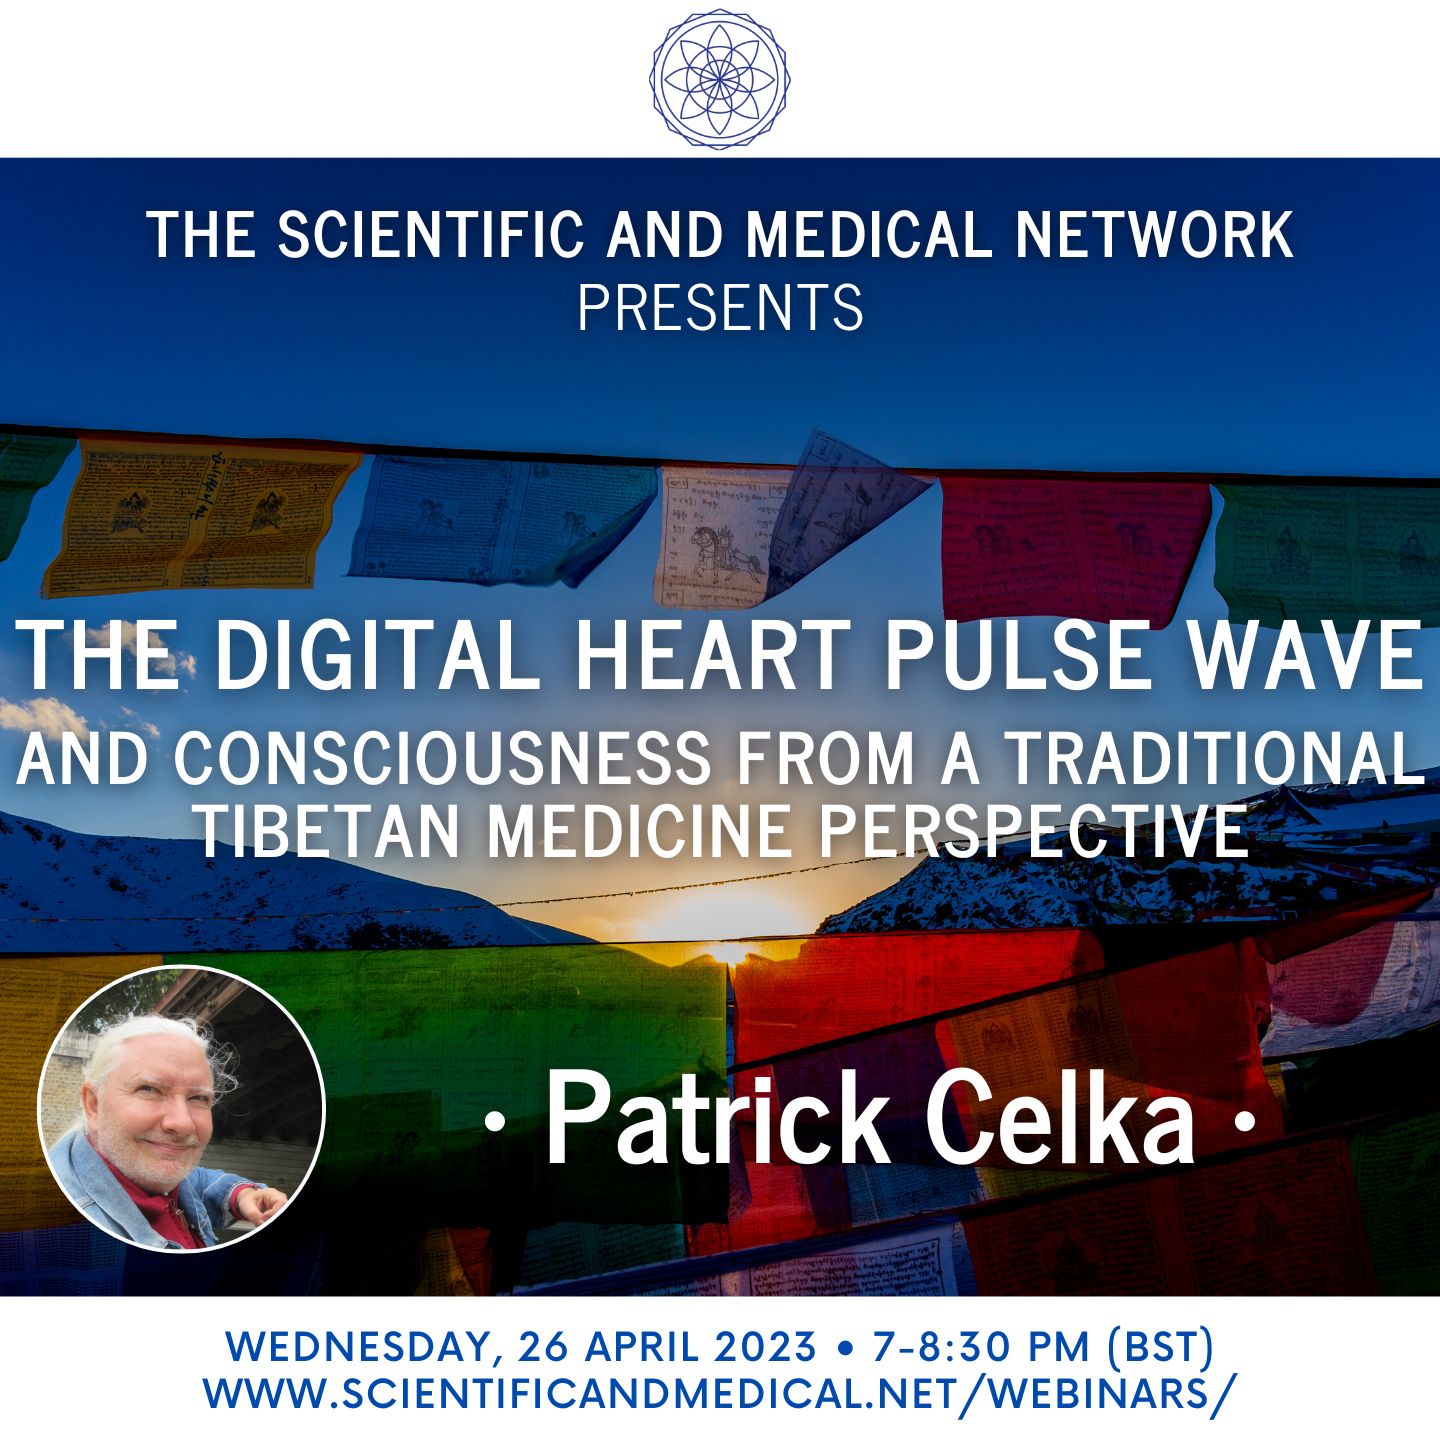 Patrick Celka – The Digital Heart Pulse Wave and Consciousness from a Traditional Tibetan Medicine Perspective